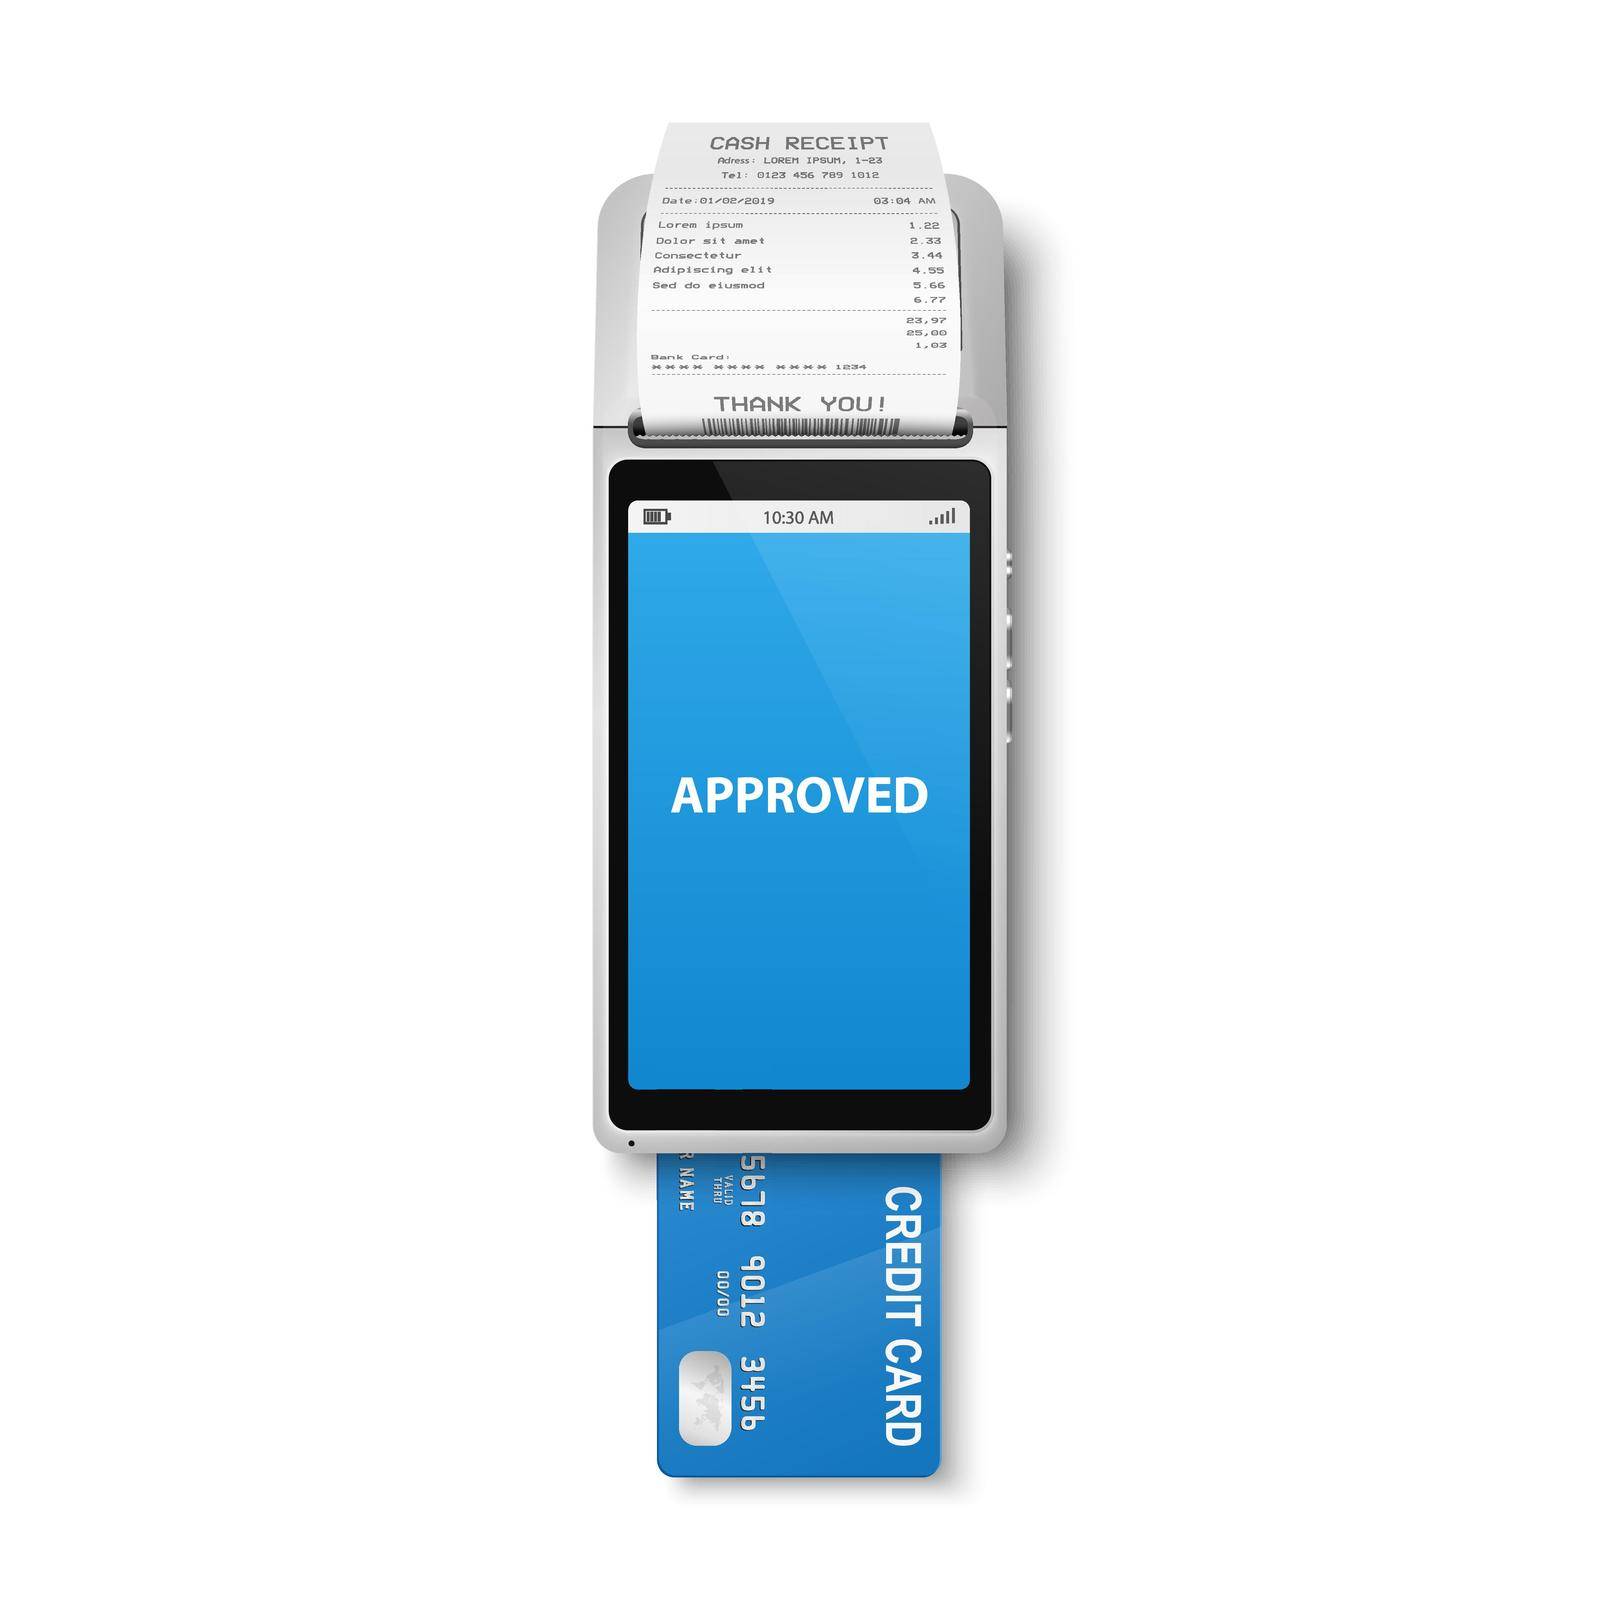 Vector 3d NFC Payment Machine with Approved Status, Credit Card and Receipt. Wi-fi, Wireless Payment. POS Terminal, Machine Design Template of Bank Payment Contactless Terminal, Mockup. Top VIew.